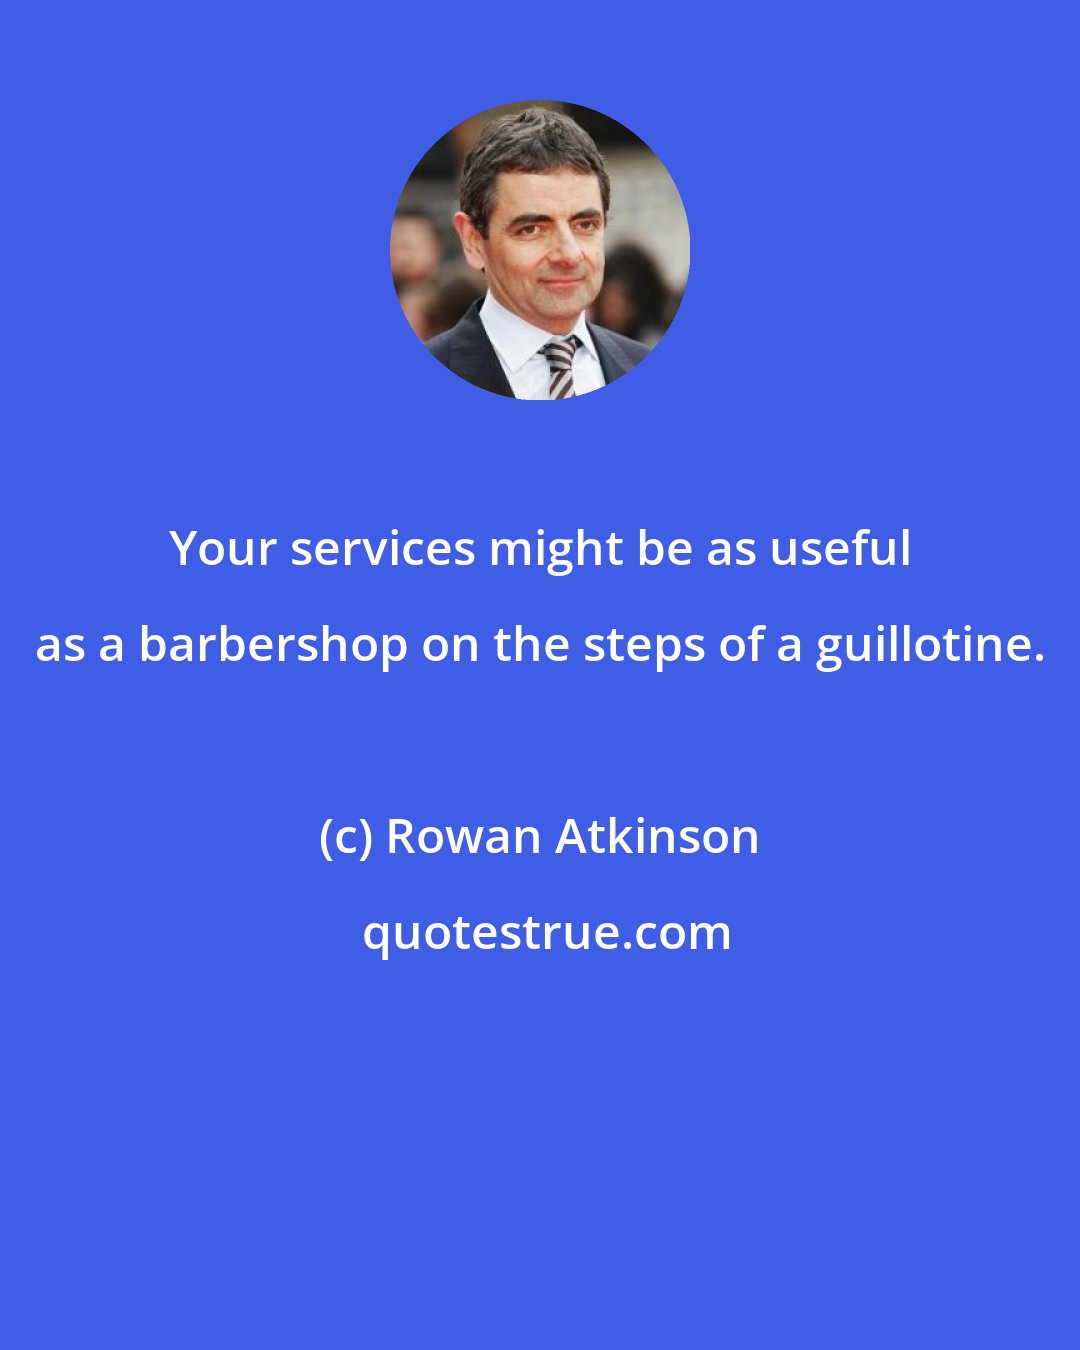 Rowan Atkinson: Your services might be as useful as a barbershop on the steps of a guillotine.